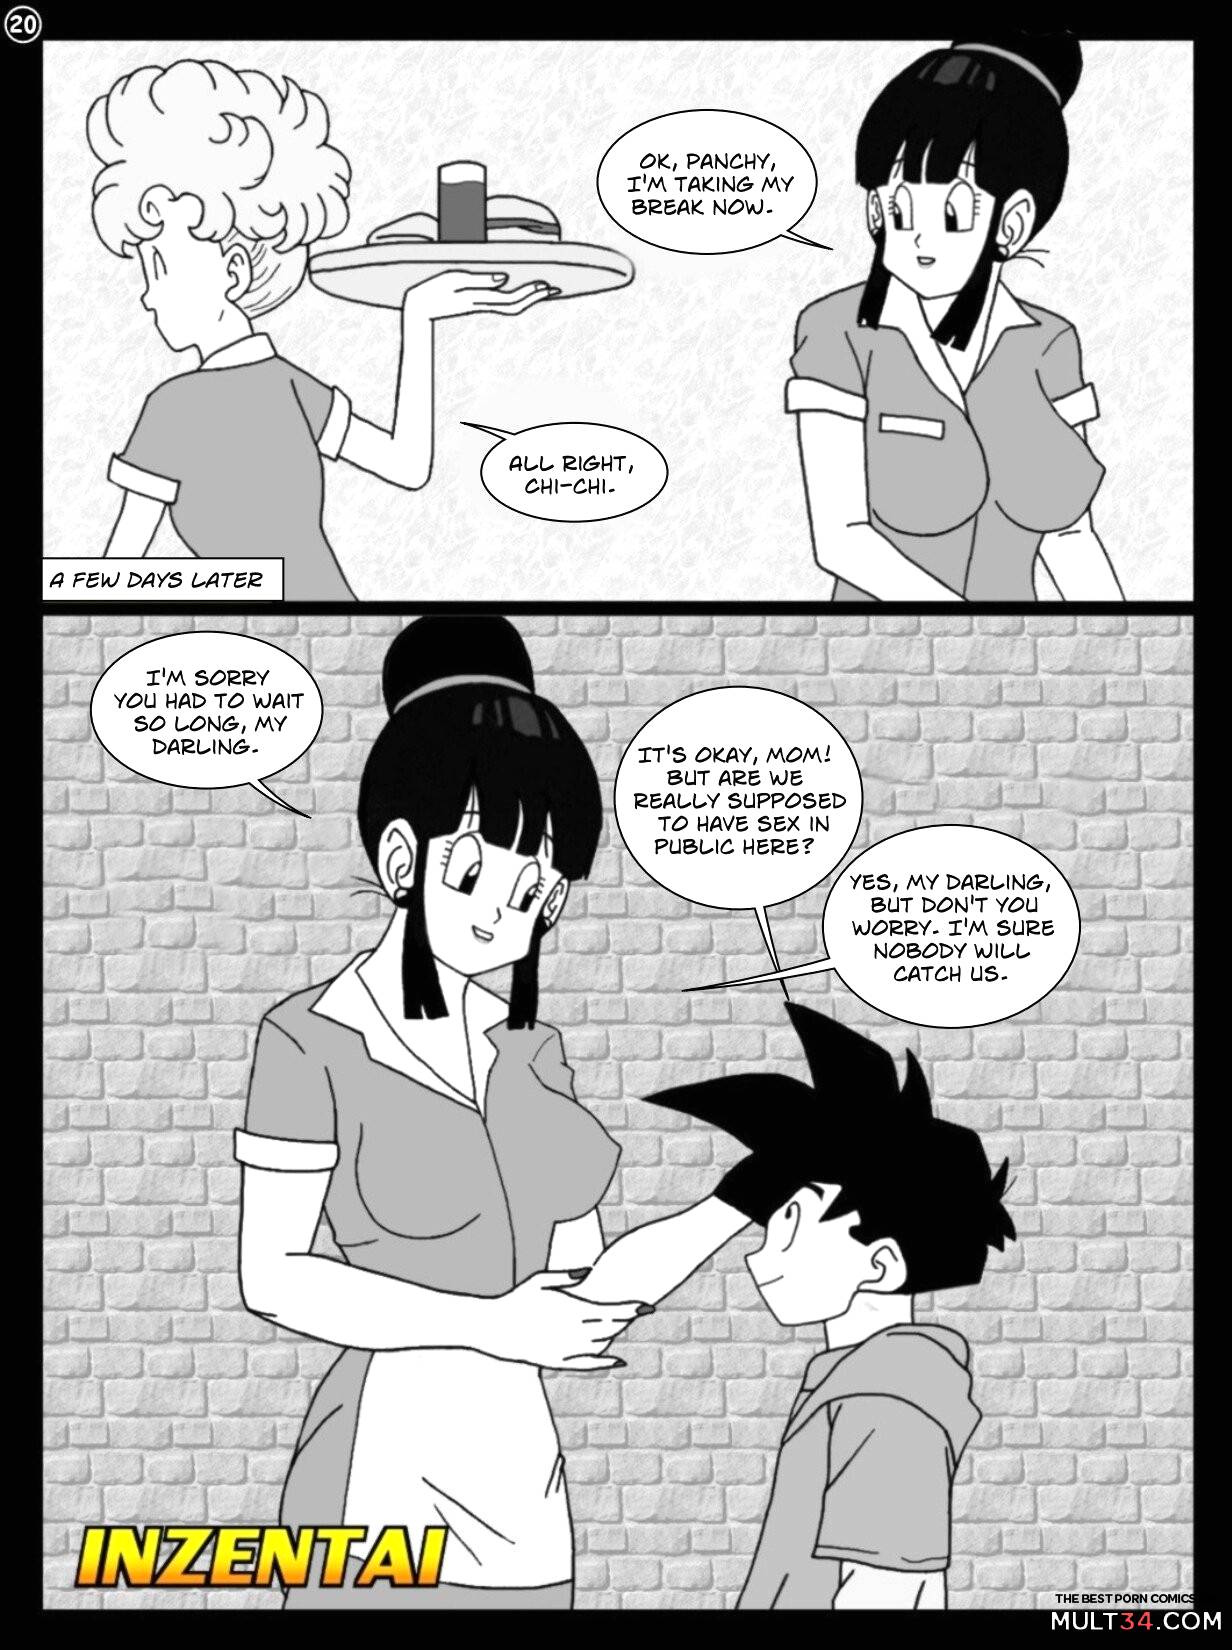 Forbidden Love - Extended page 21